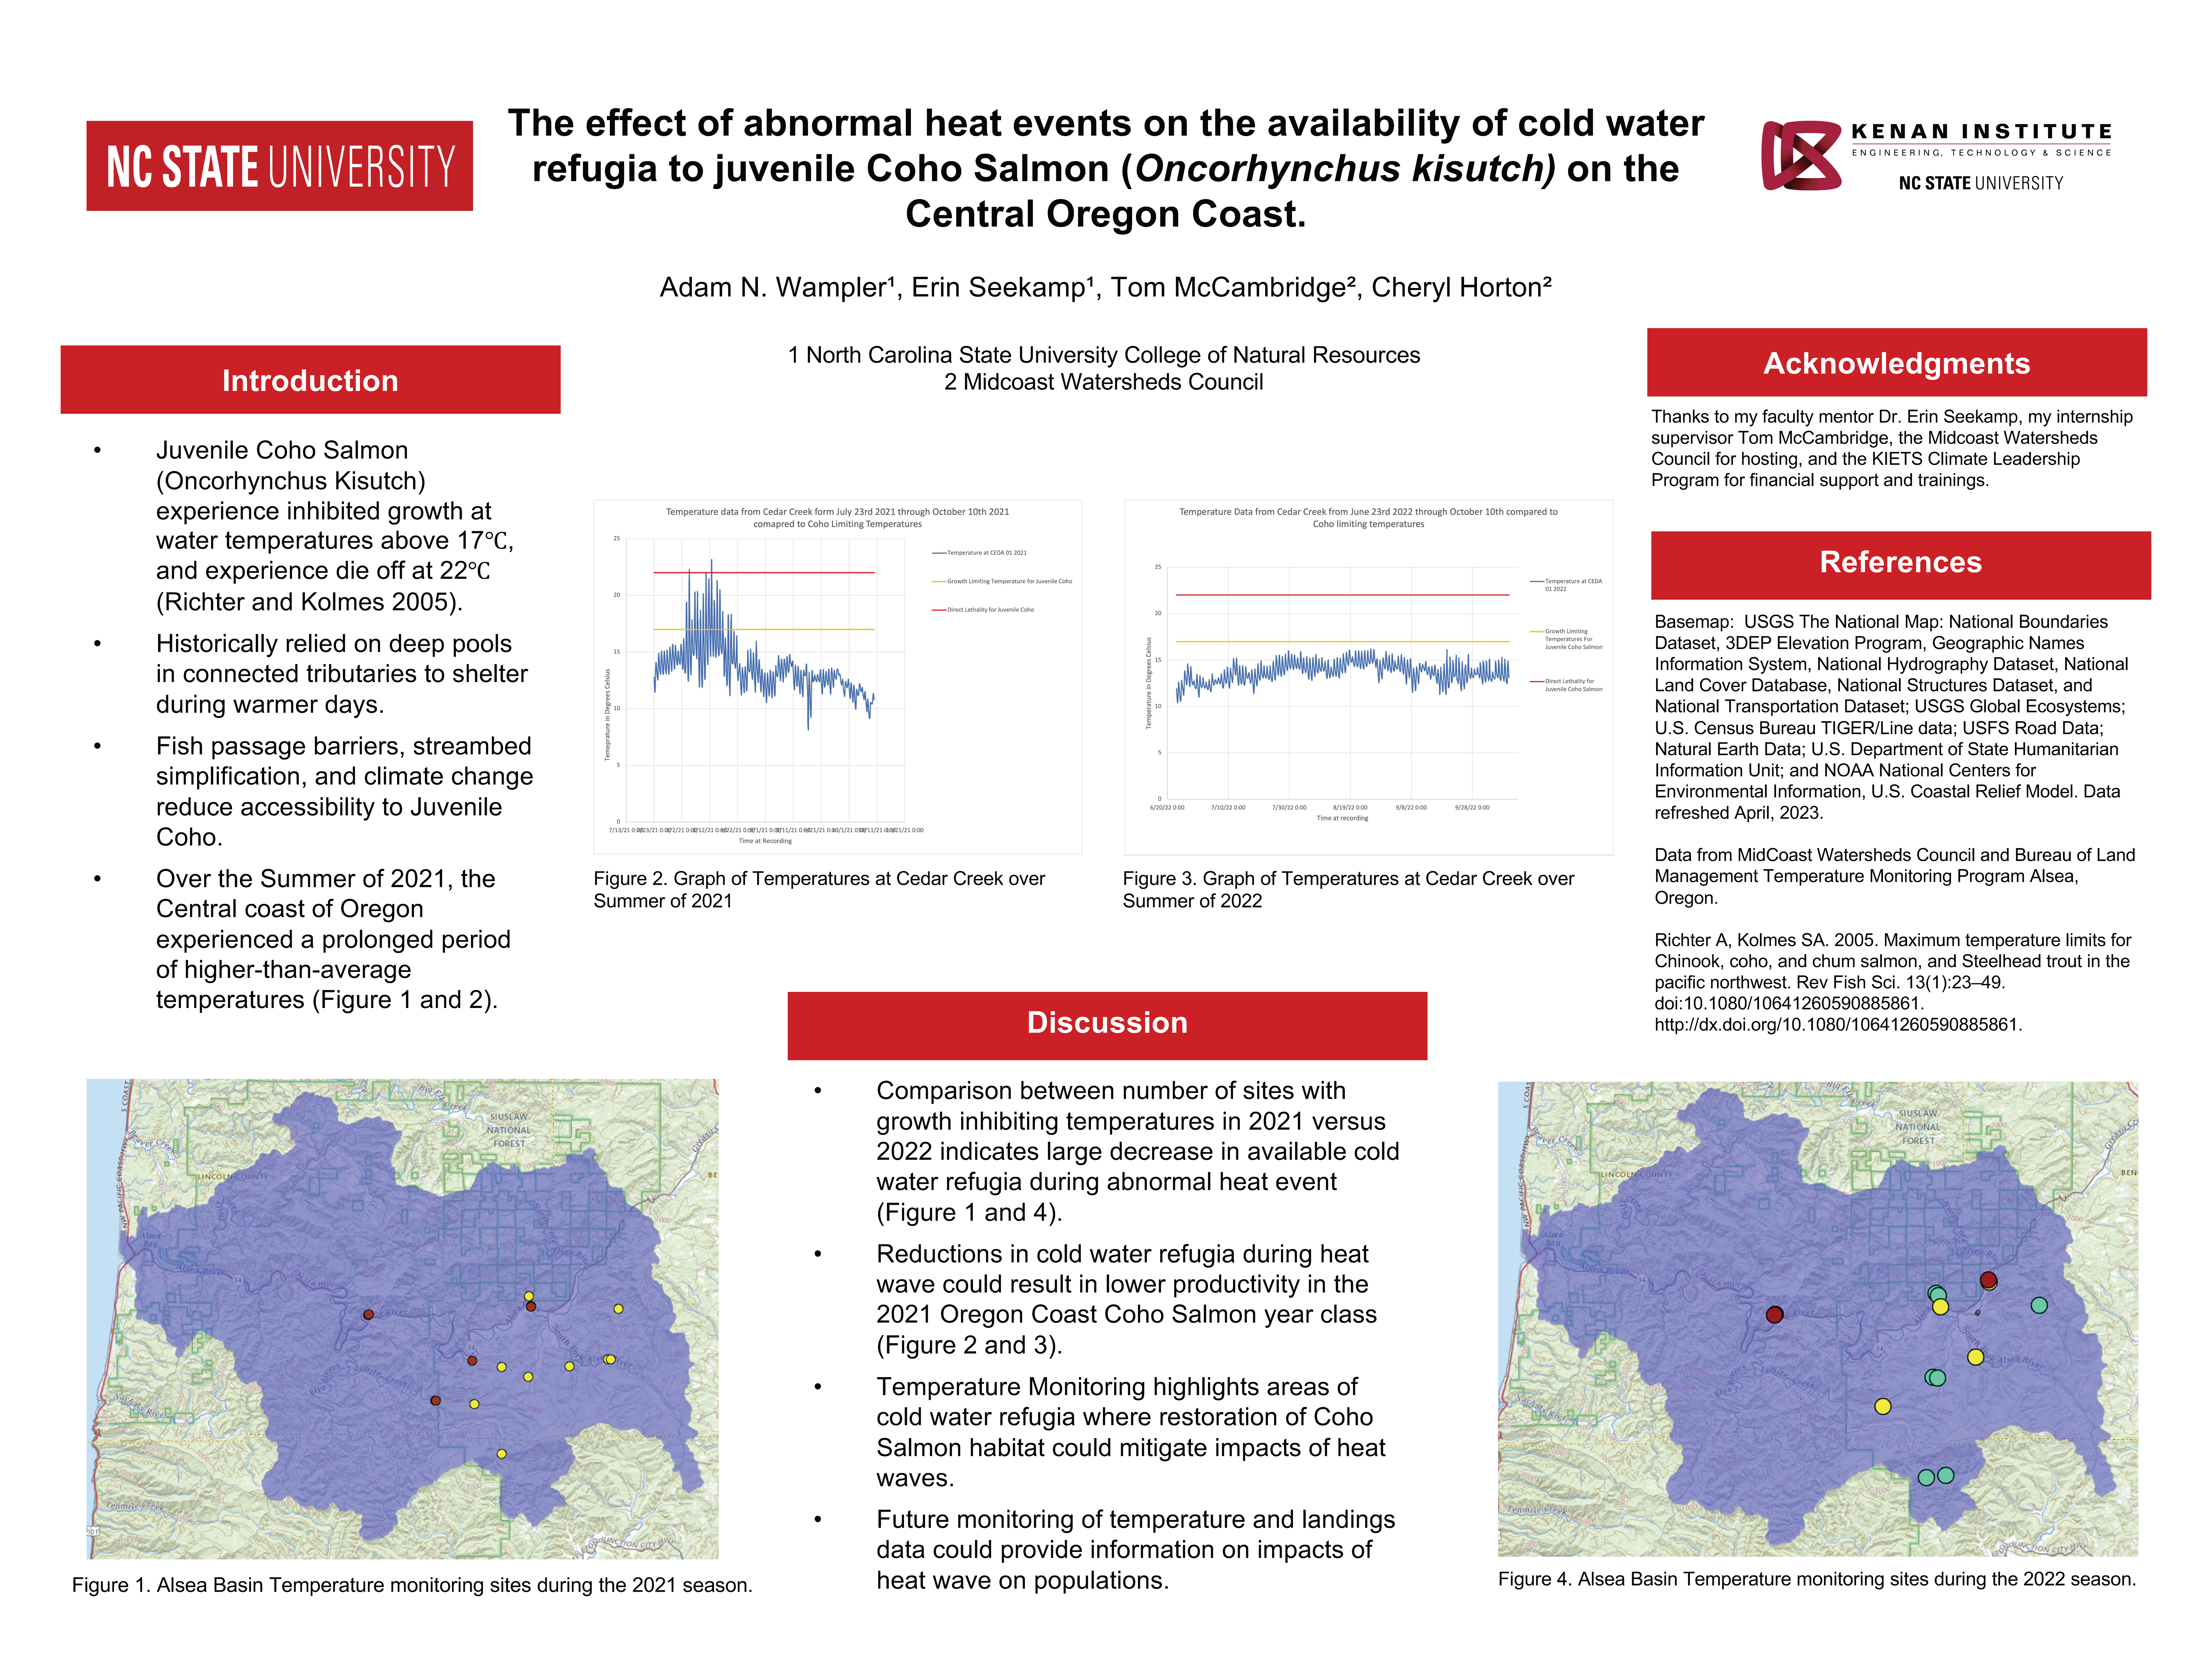 image of Adam Wampler's poster, "The effect of abnormal heat events on teh availability of cold water refugia to juvenile Coho Salmon (Oncorhynchus kisutch) on the Central Oregon Coast"